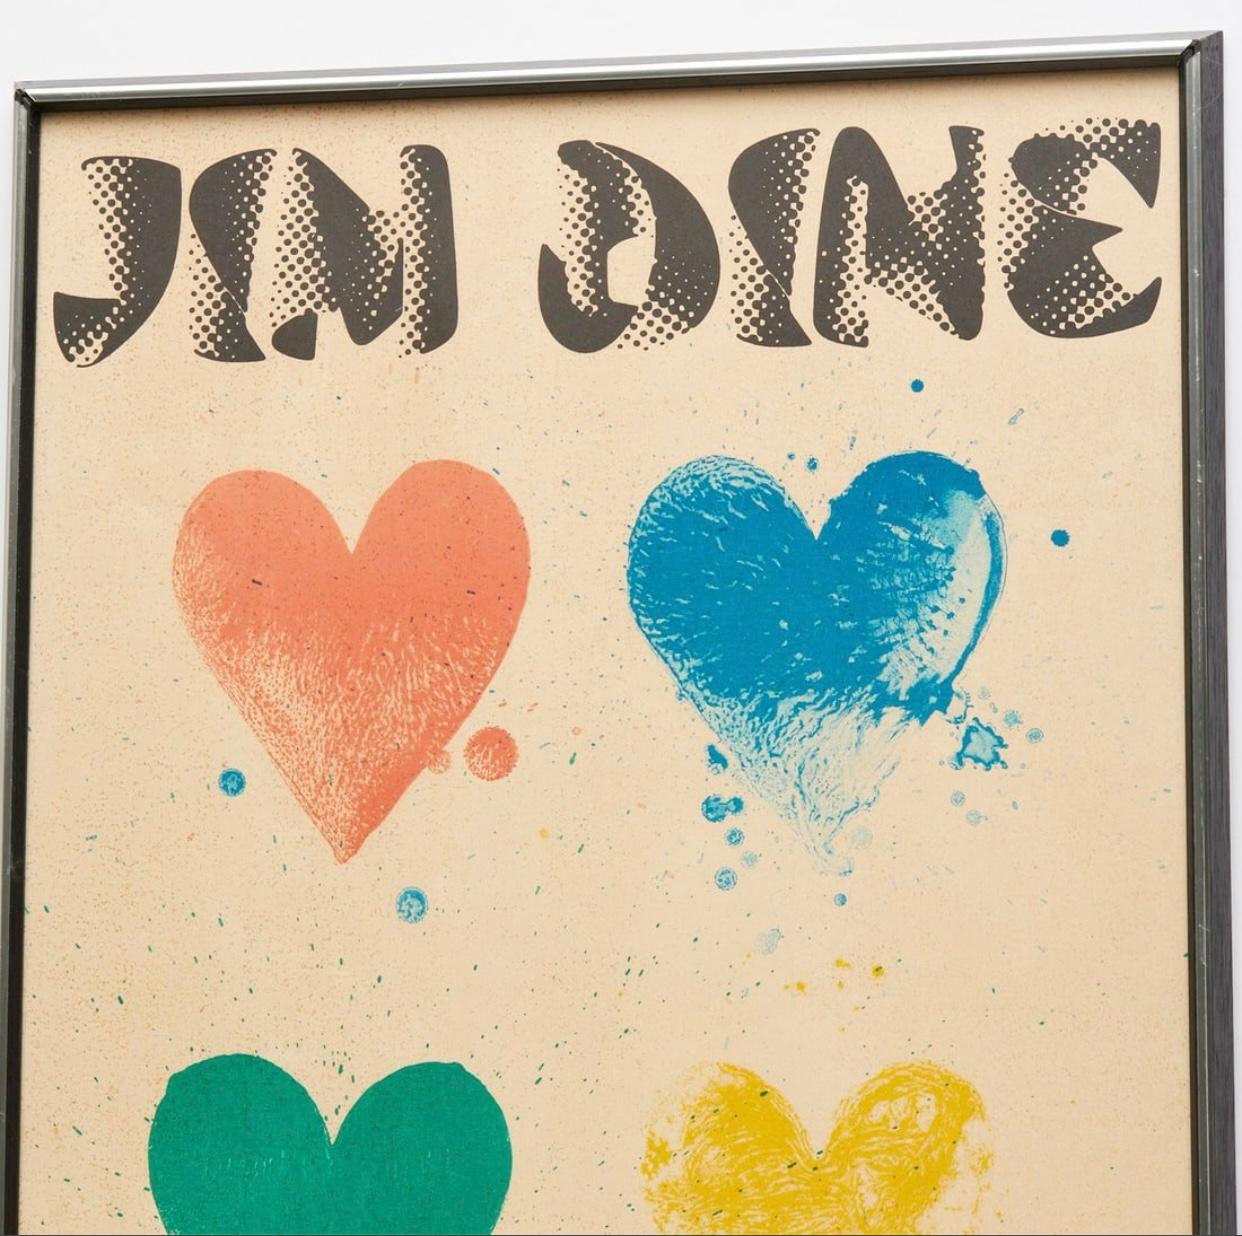 Late 20th Century Jim Dine Signed National Galerie Berlin Lithograph Poster 1971 For Sale